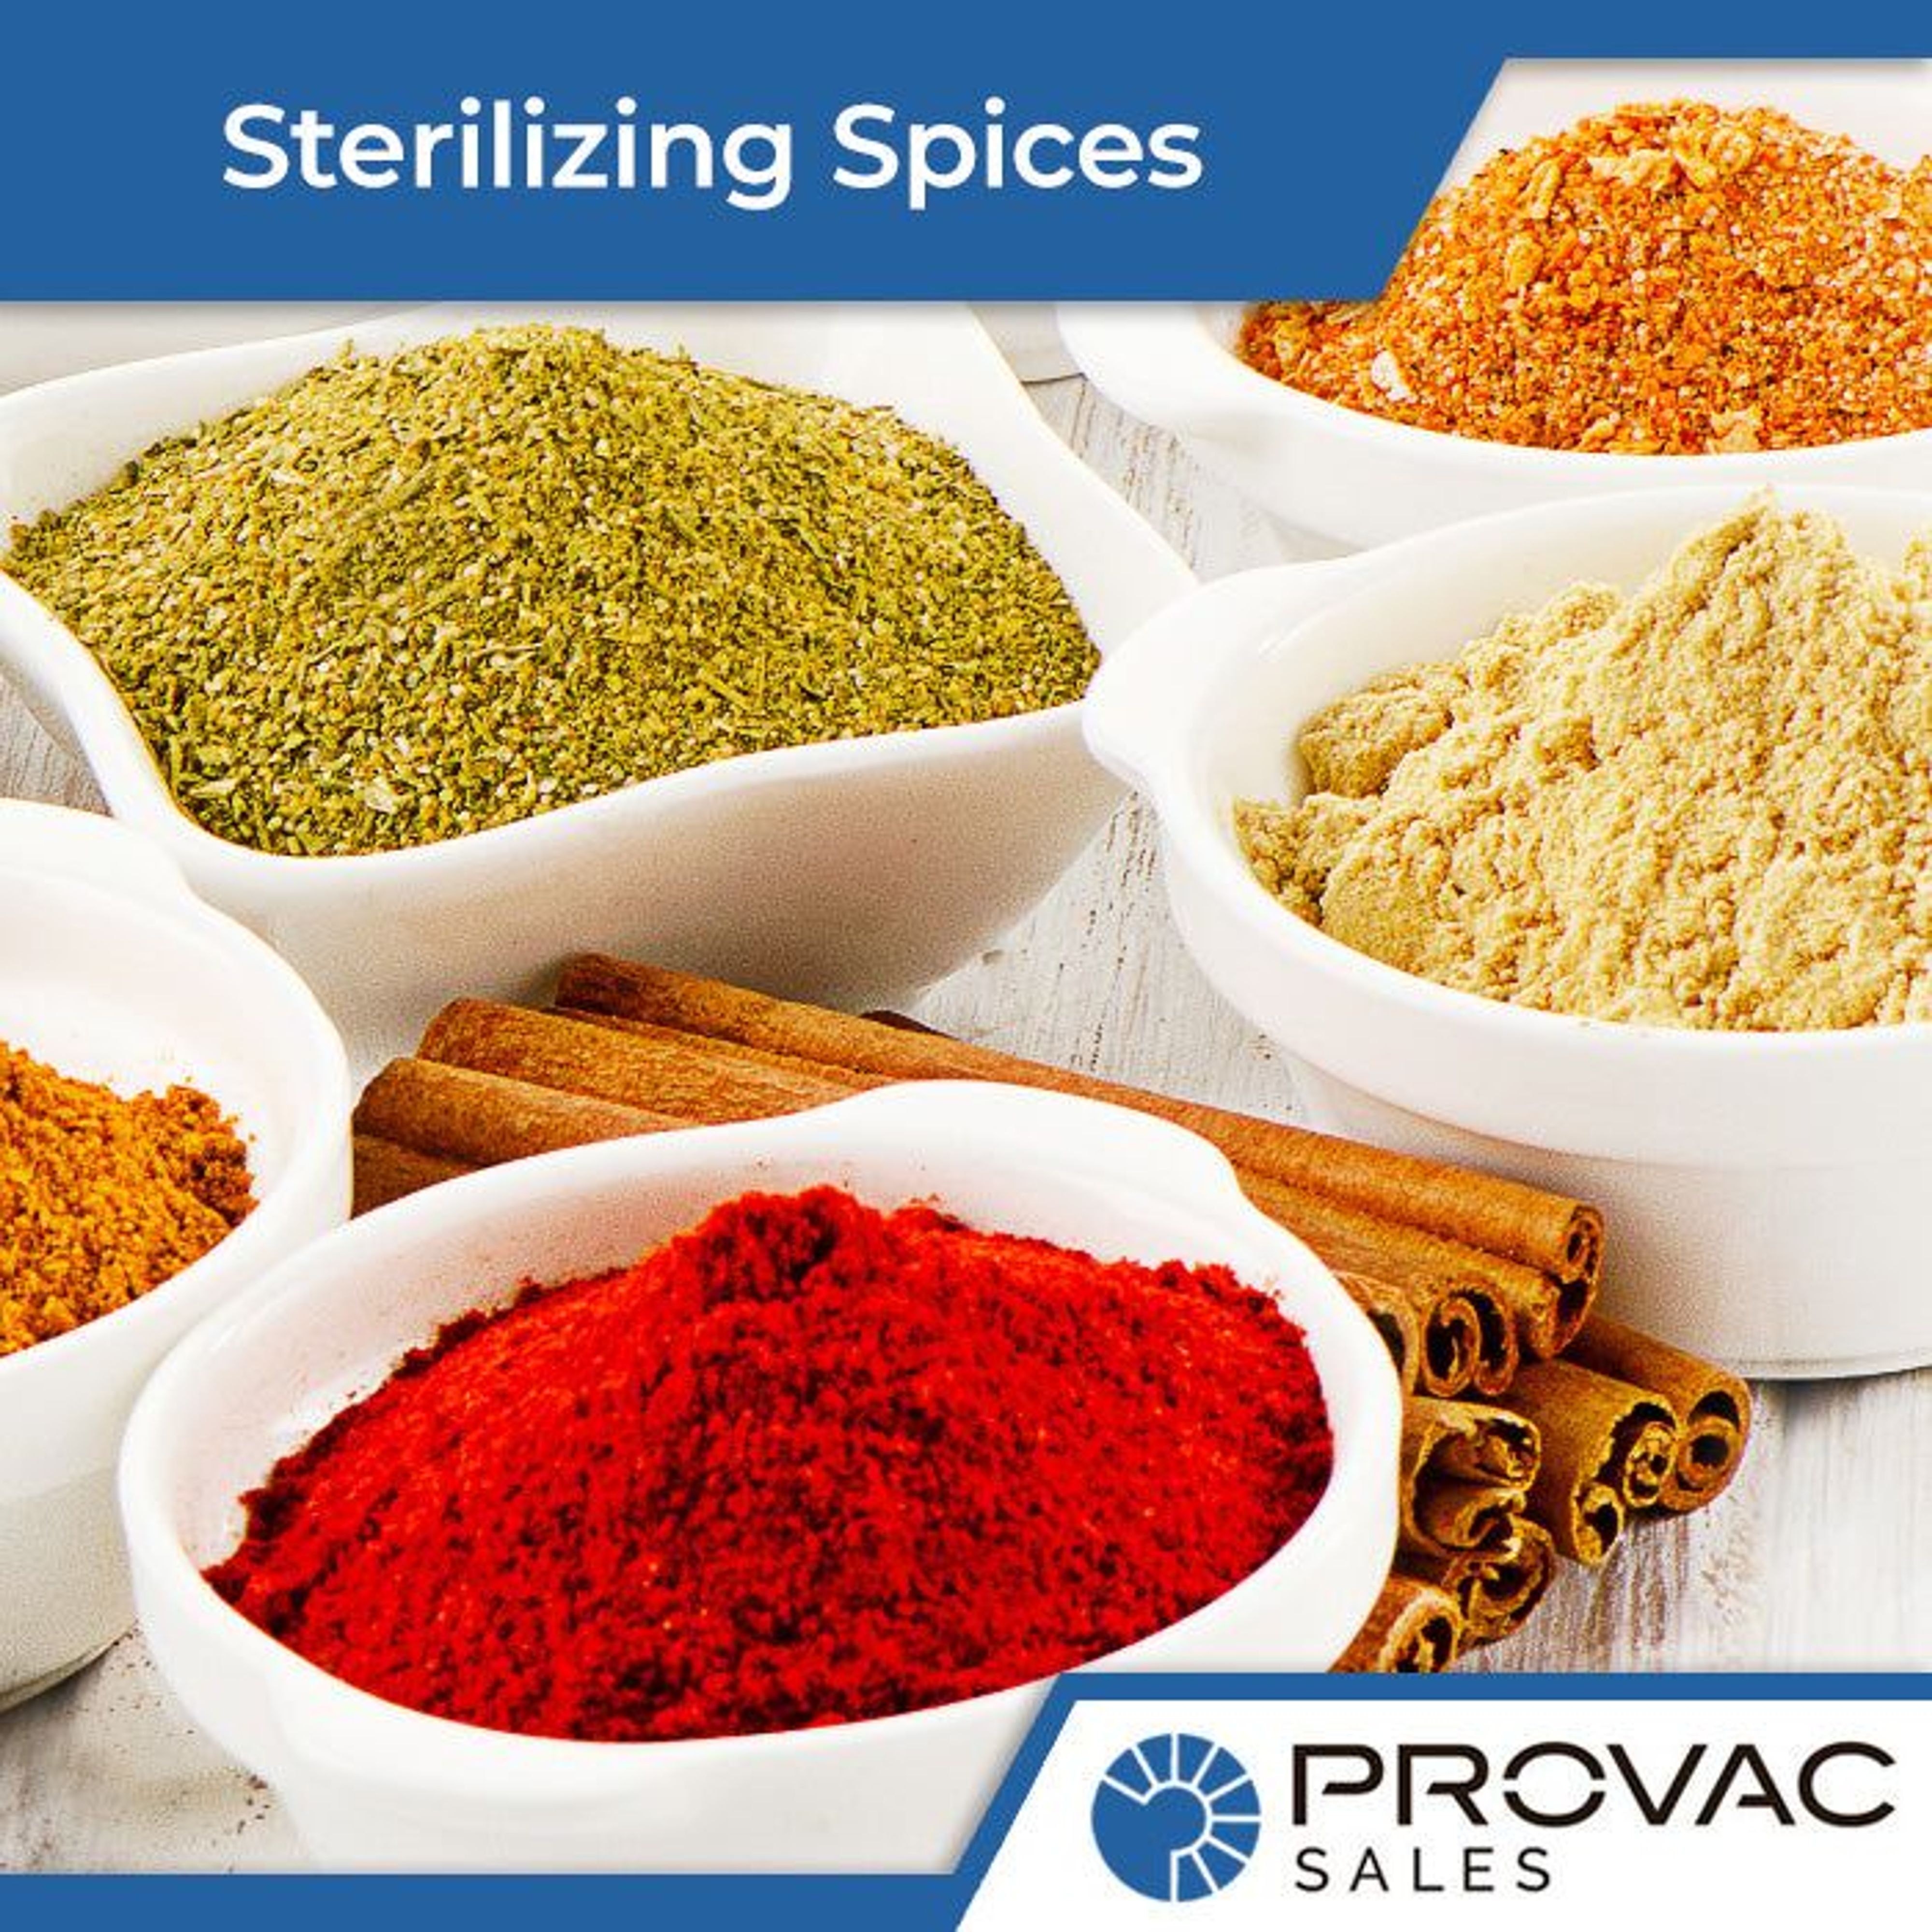 How to Sterilize Spices to Kill Microorganisms with Vacuum Pumps Background